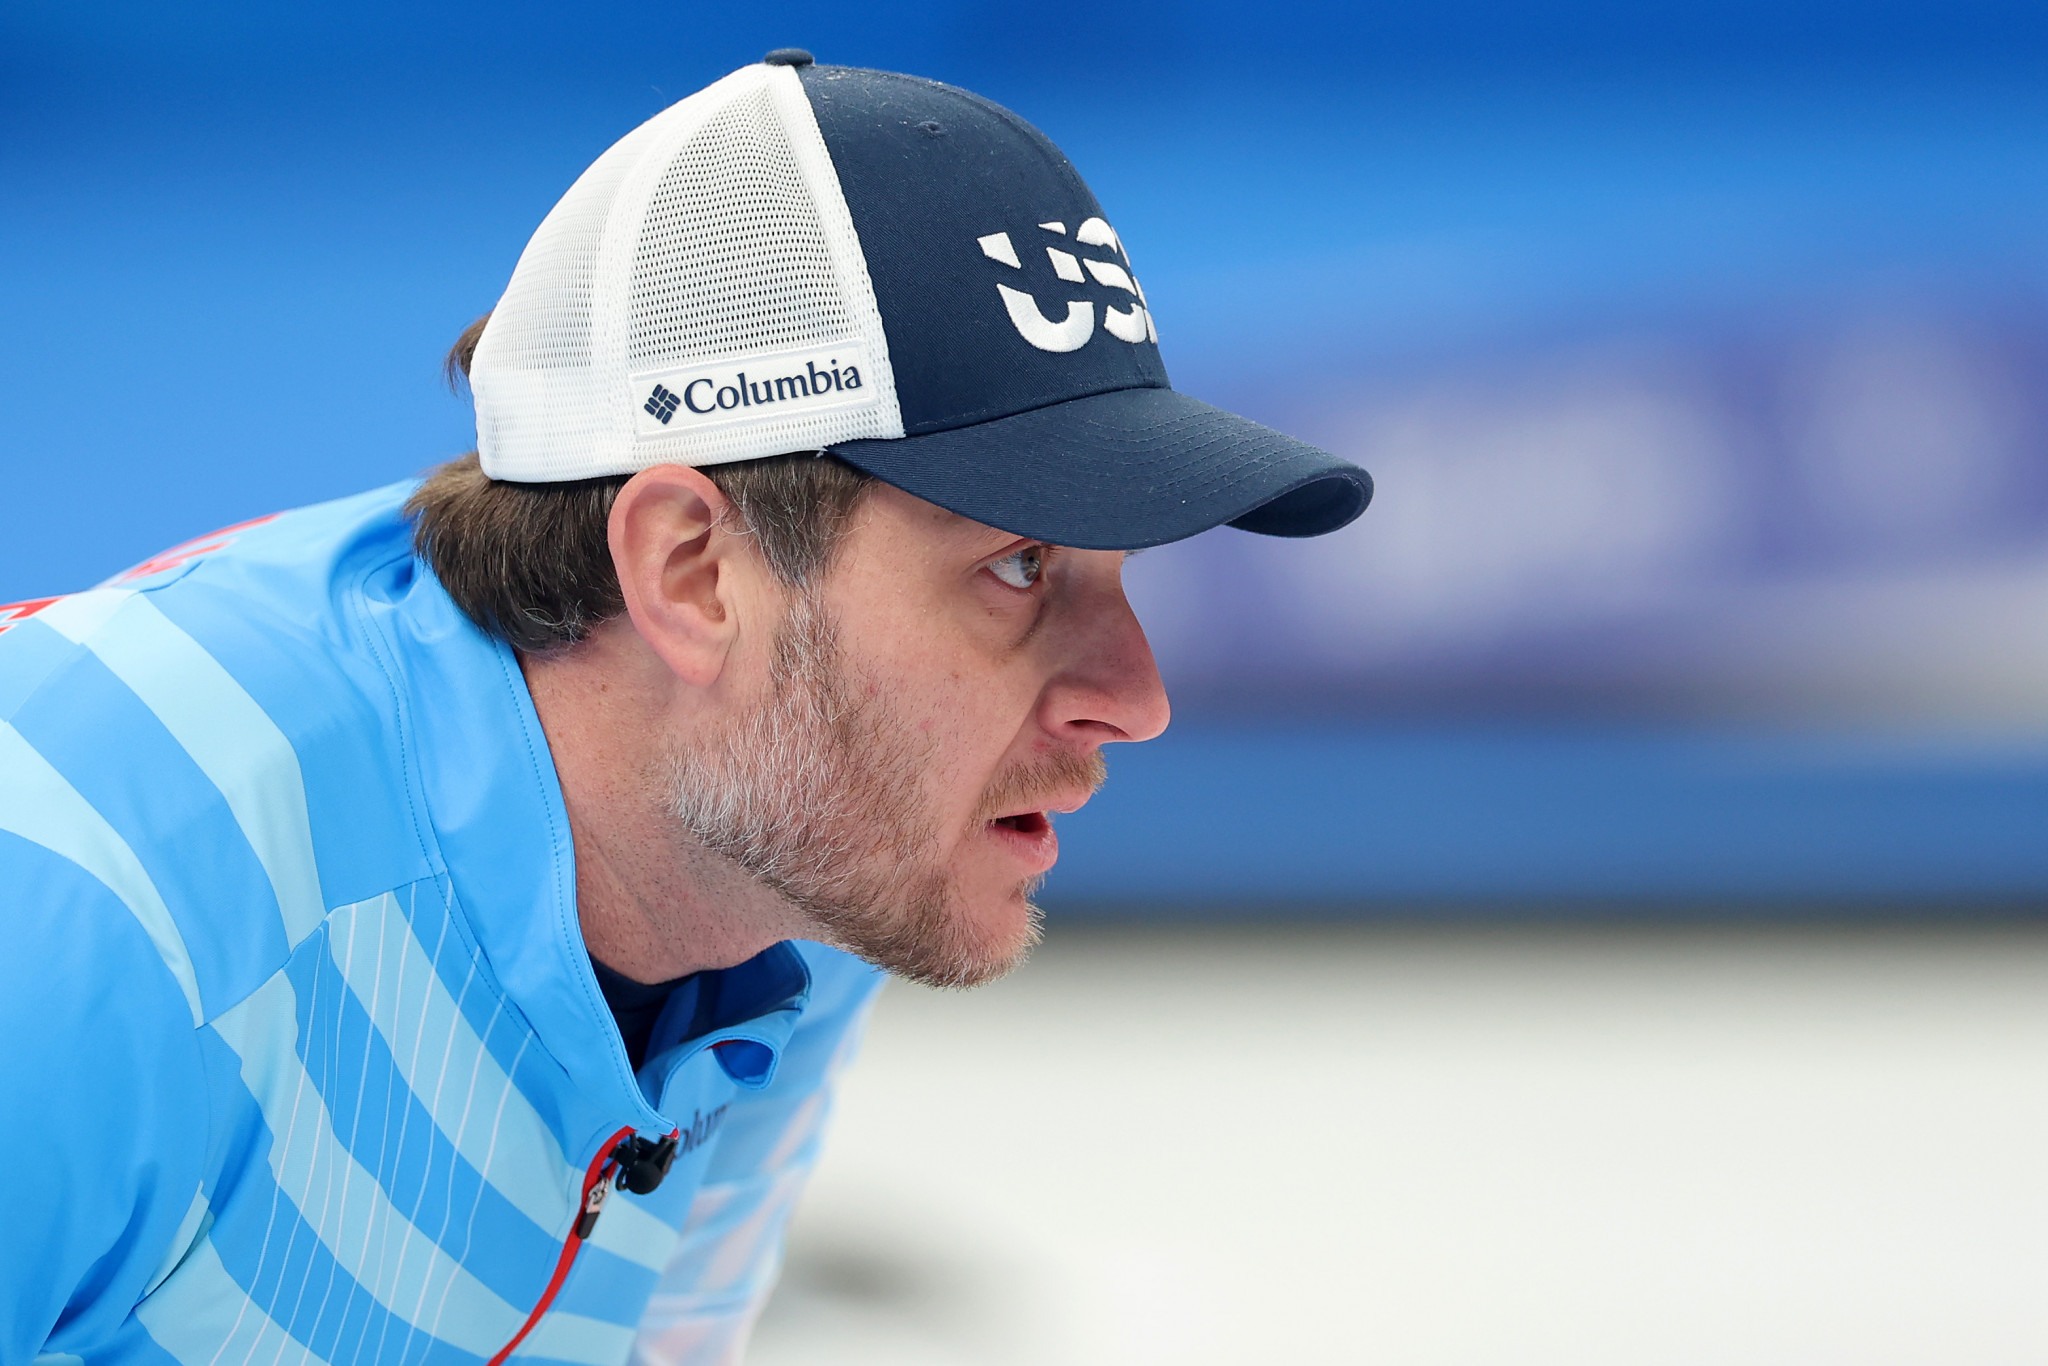 Olympic gold medallist Shuster set to target Milan Cortina 2026 with curling team-mates